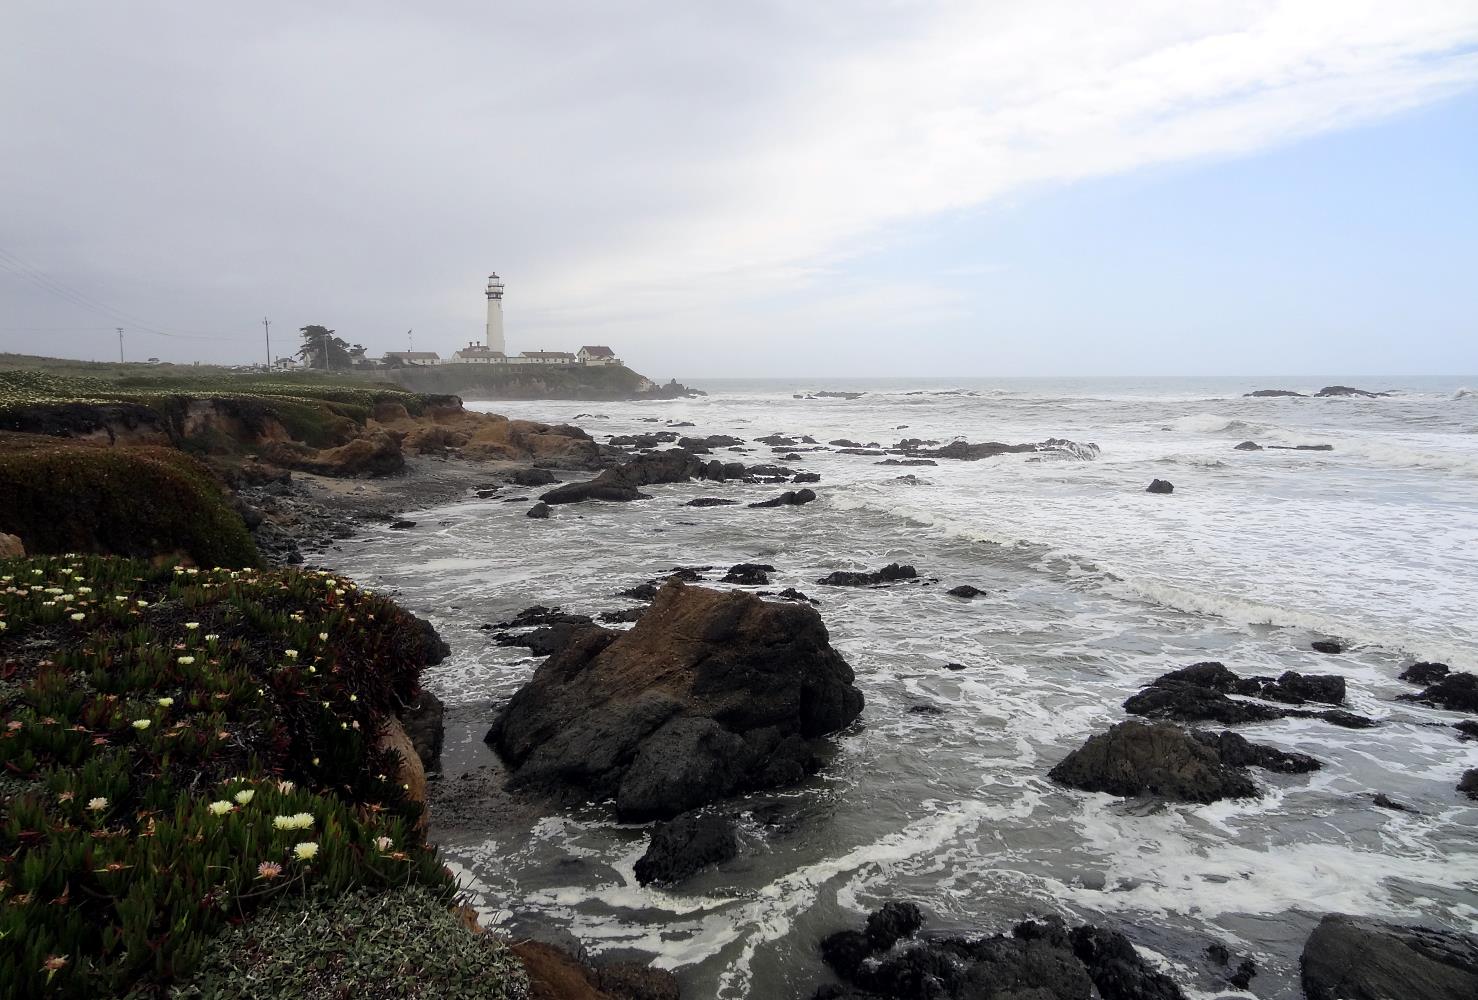 Eventually you came to Pidgin Point Lighthouse where the coast starts to turn to the East into Monterey Bay. The lighthouse is now a Hostel where you can stay the night. See those rocks out there at the right of the picture. That was a fun scuba area... when calm enough